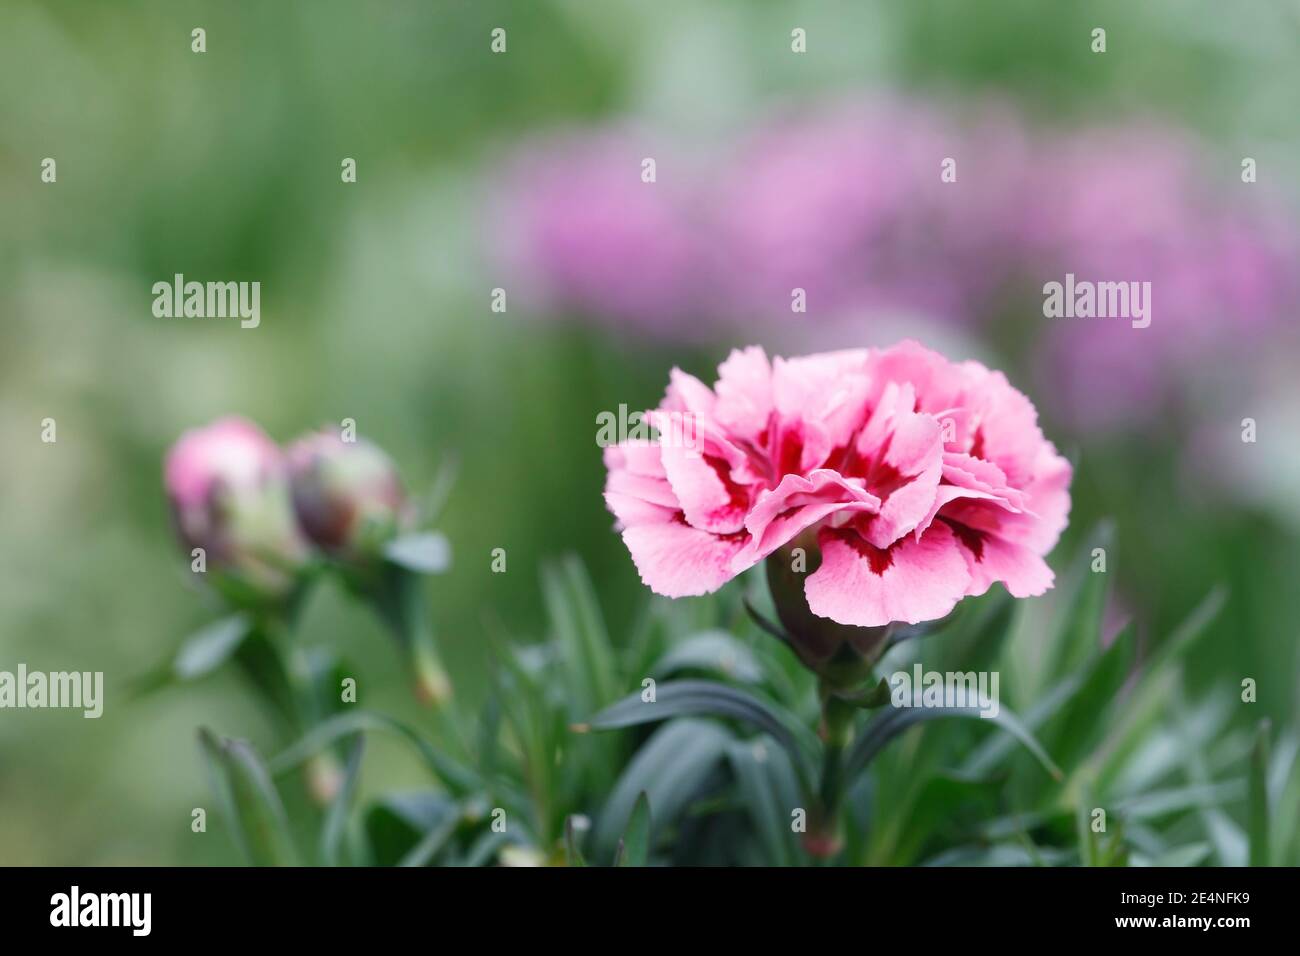 Dianthus flowers in Spring. Stock Photo